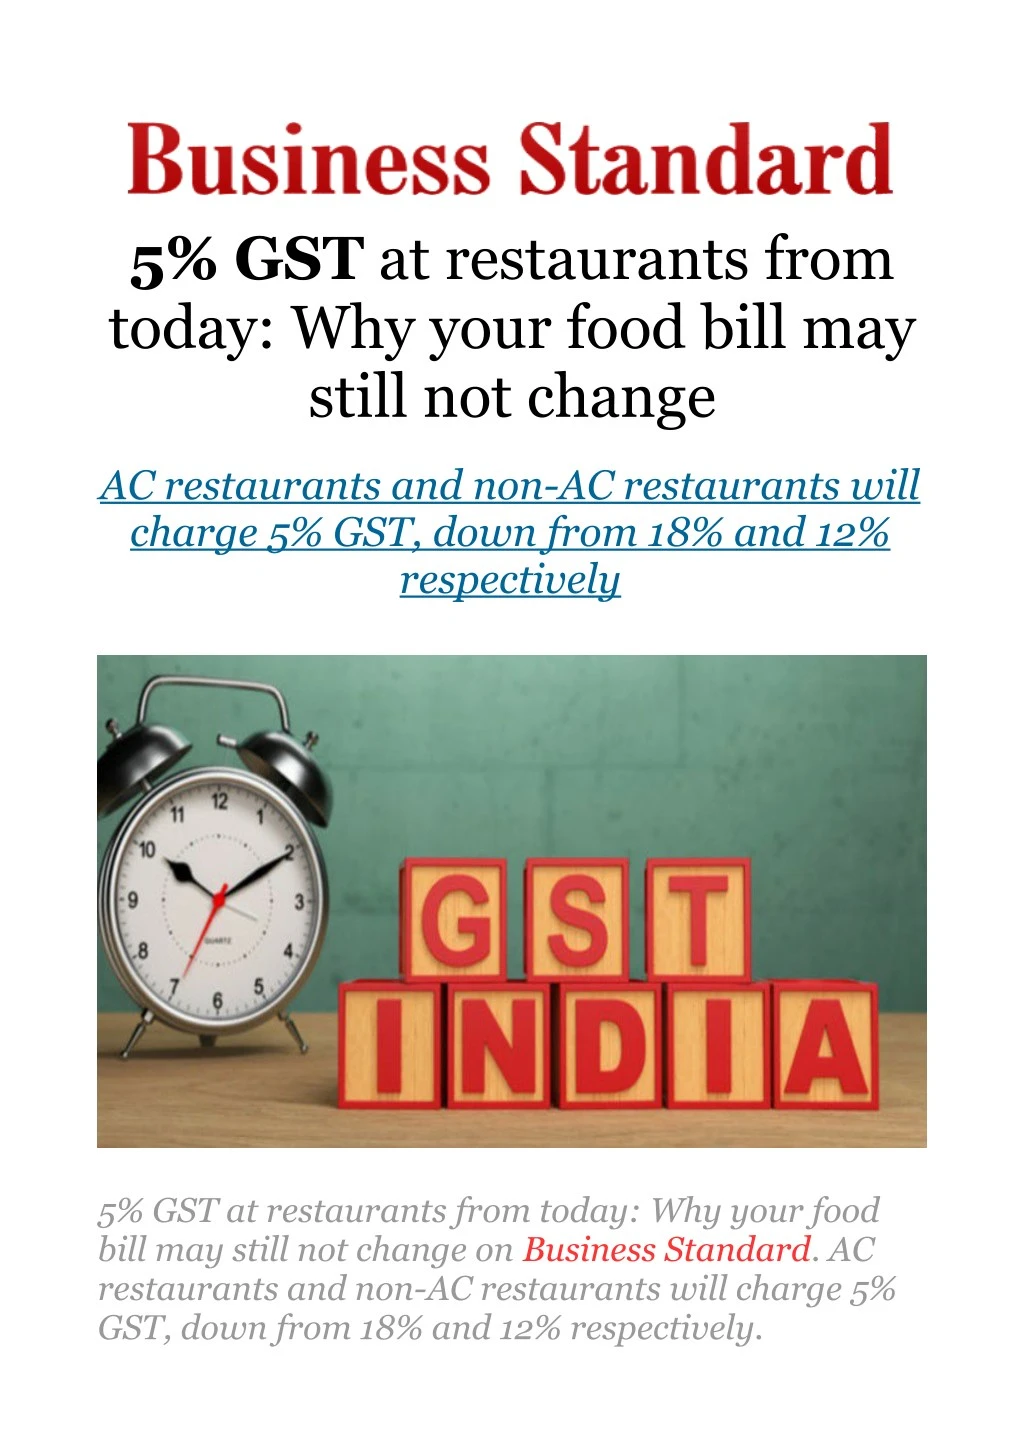 5 gst at restaurants from today why your food